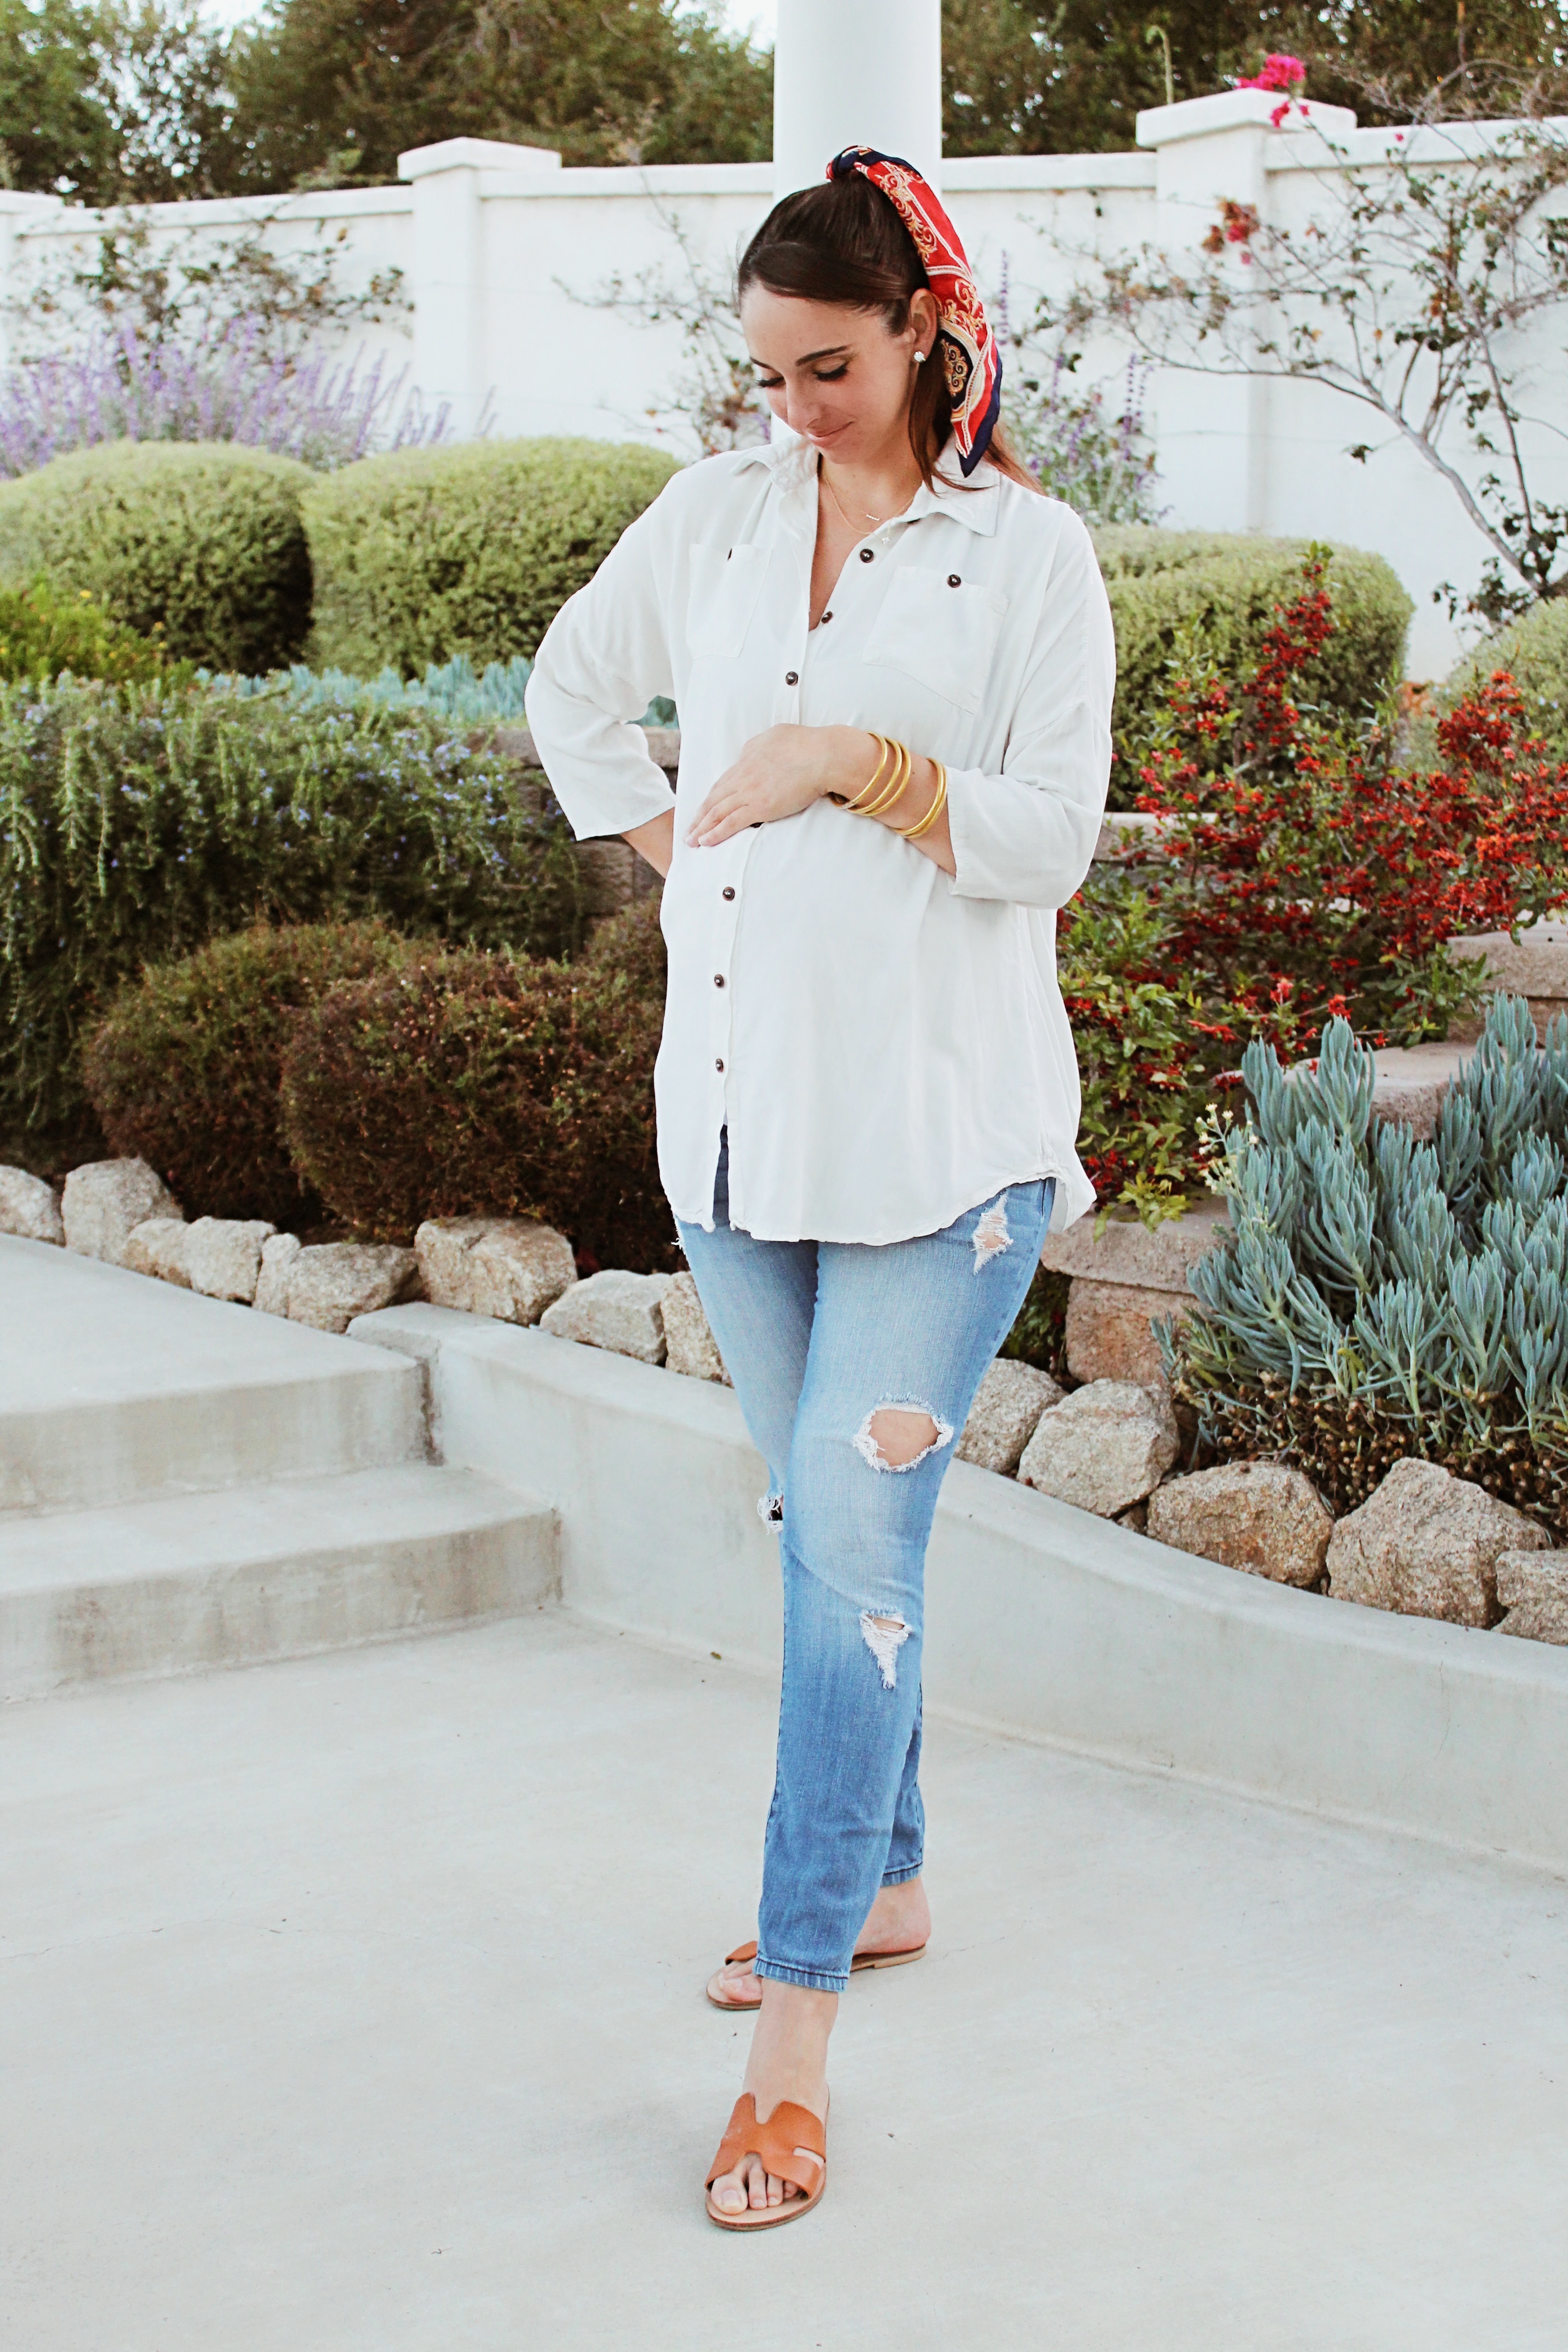 Maternity Style- 4th of July Maternity outfits long white blouse with jeans everyday maternity style street style casual